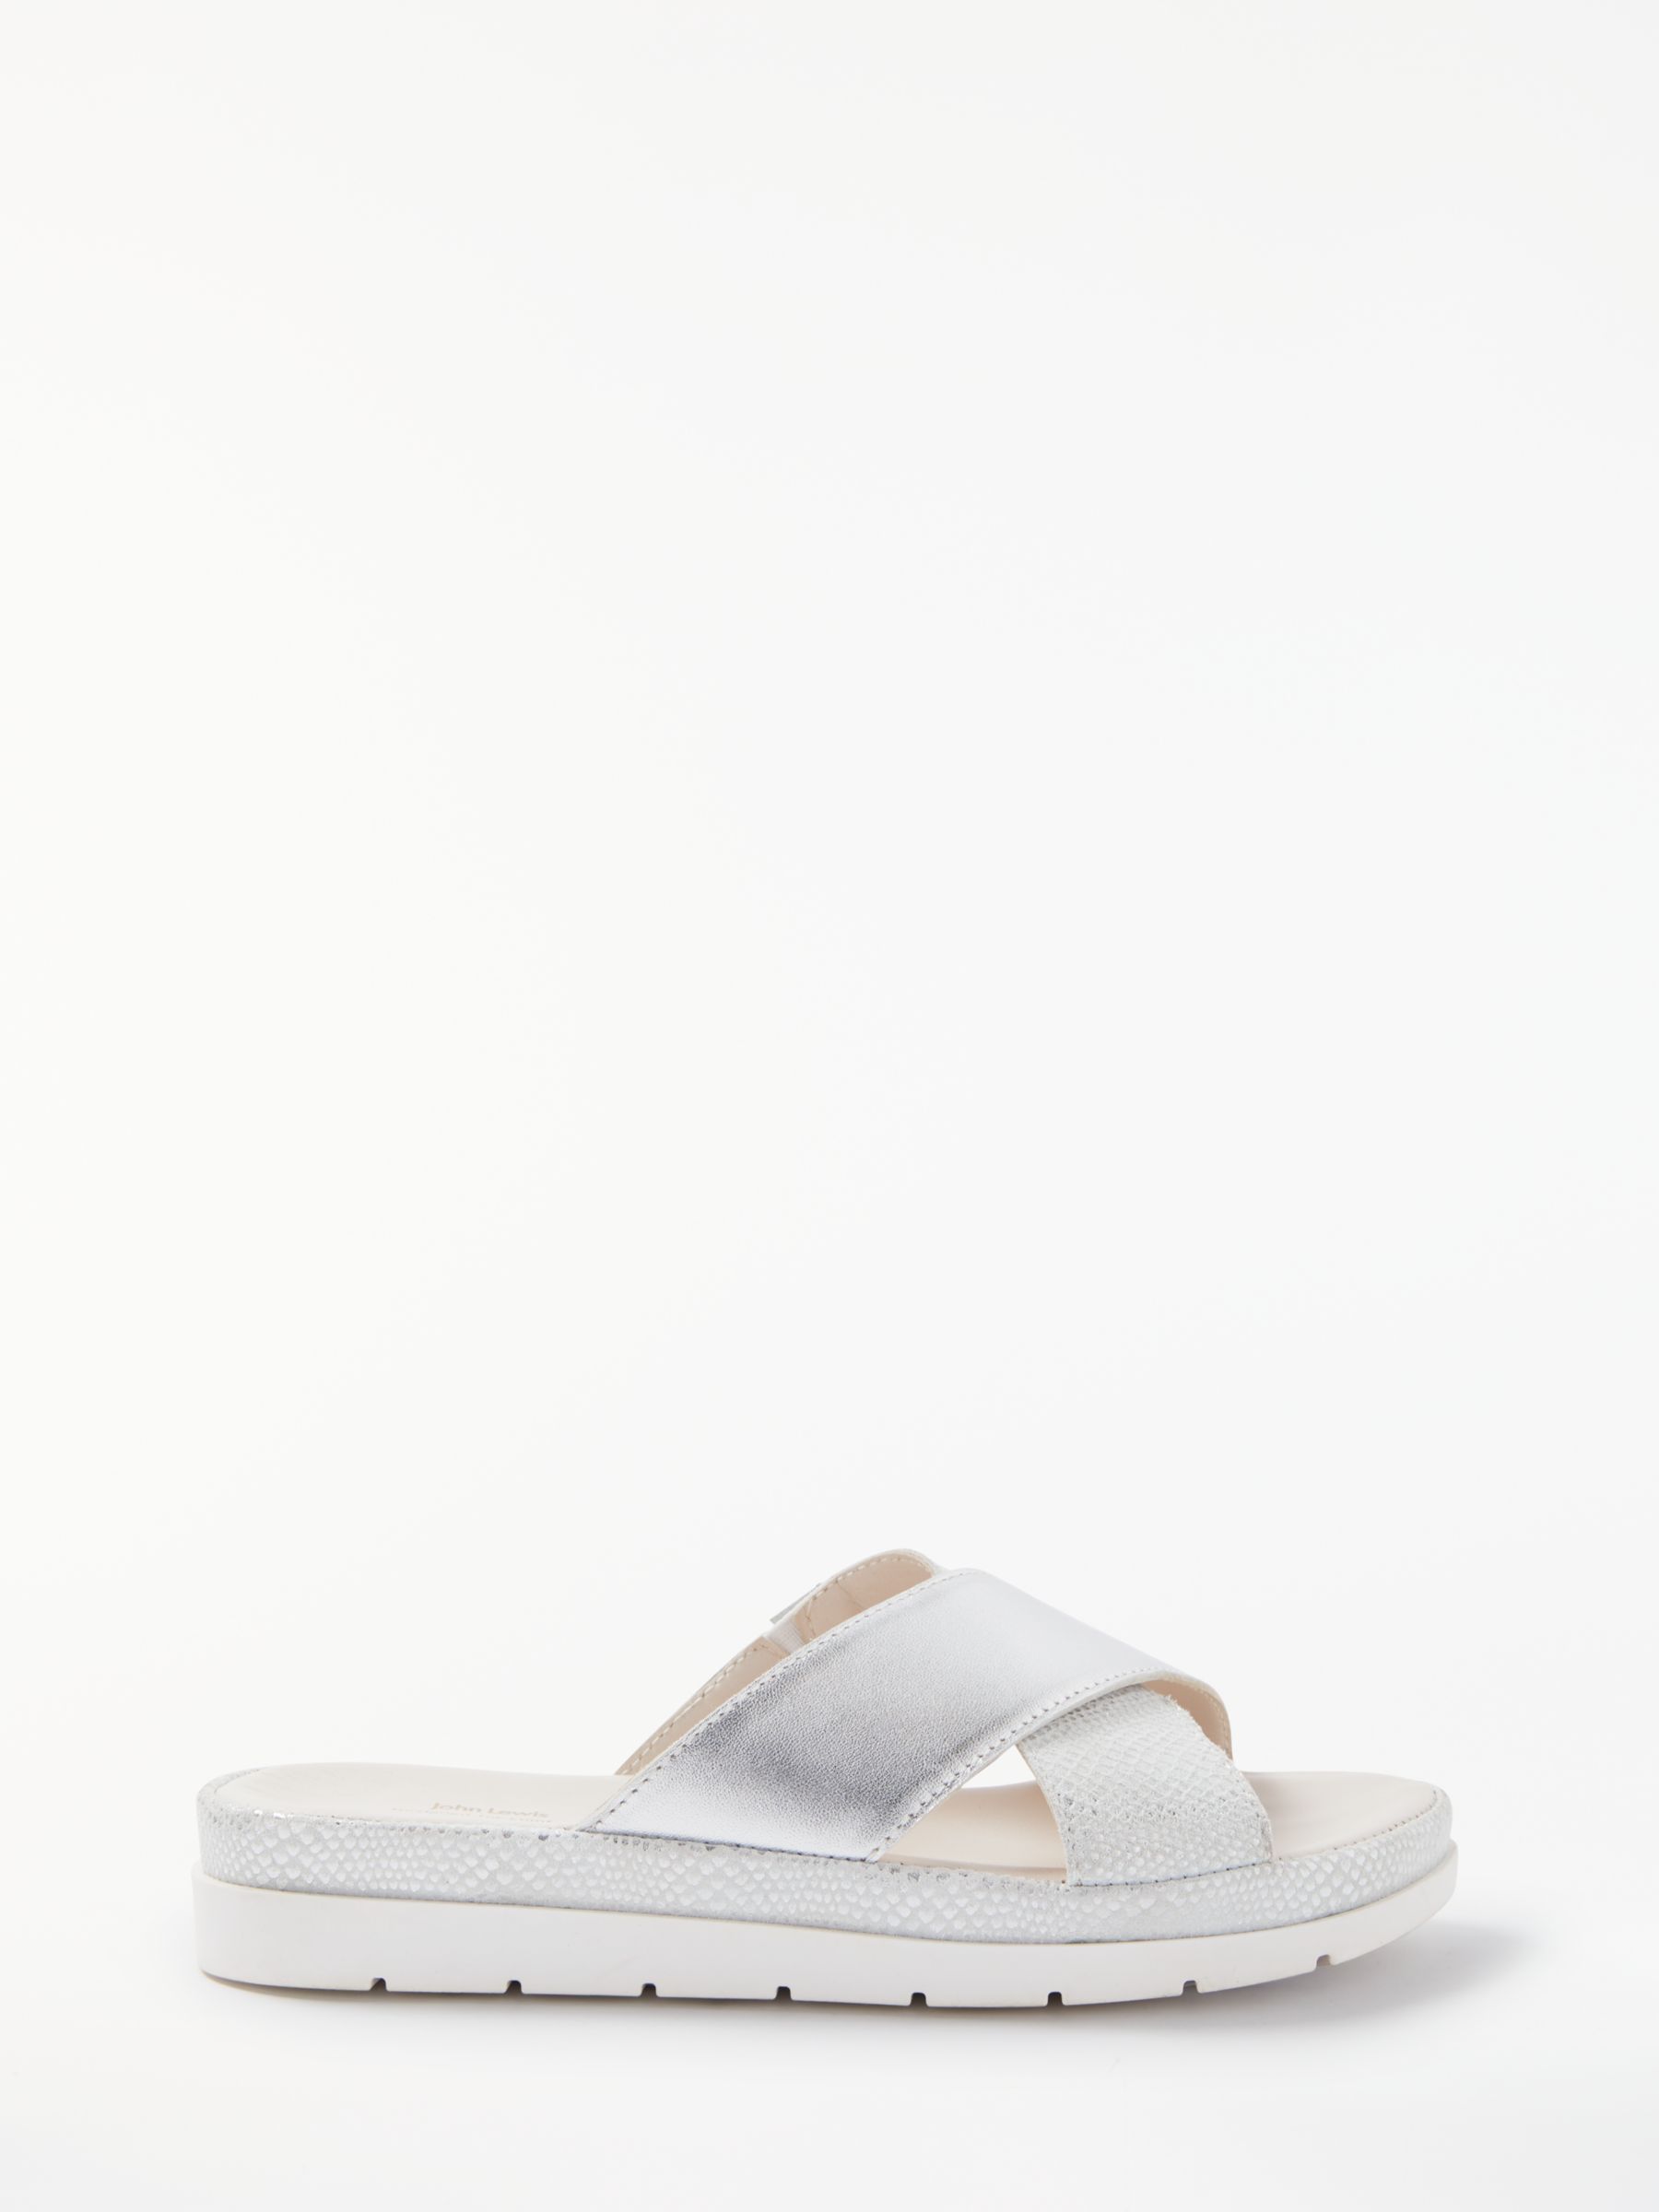 John Lewis & Partners Laurie Cross Strap Slider Sandals, Silver Leather